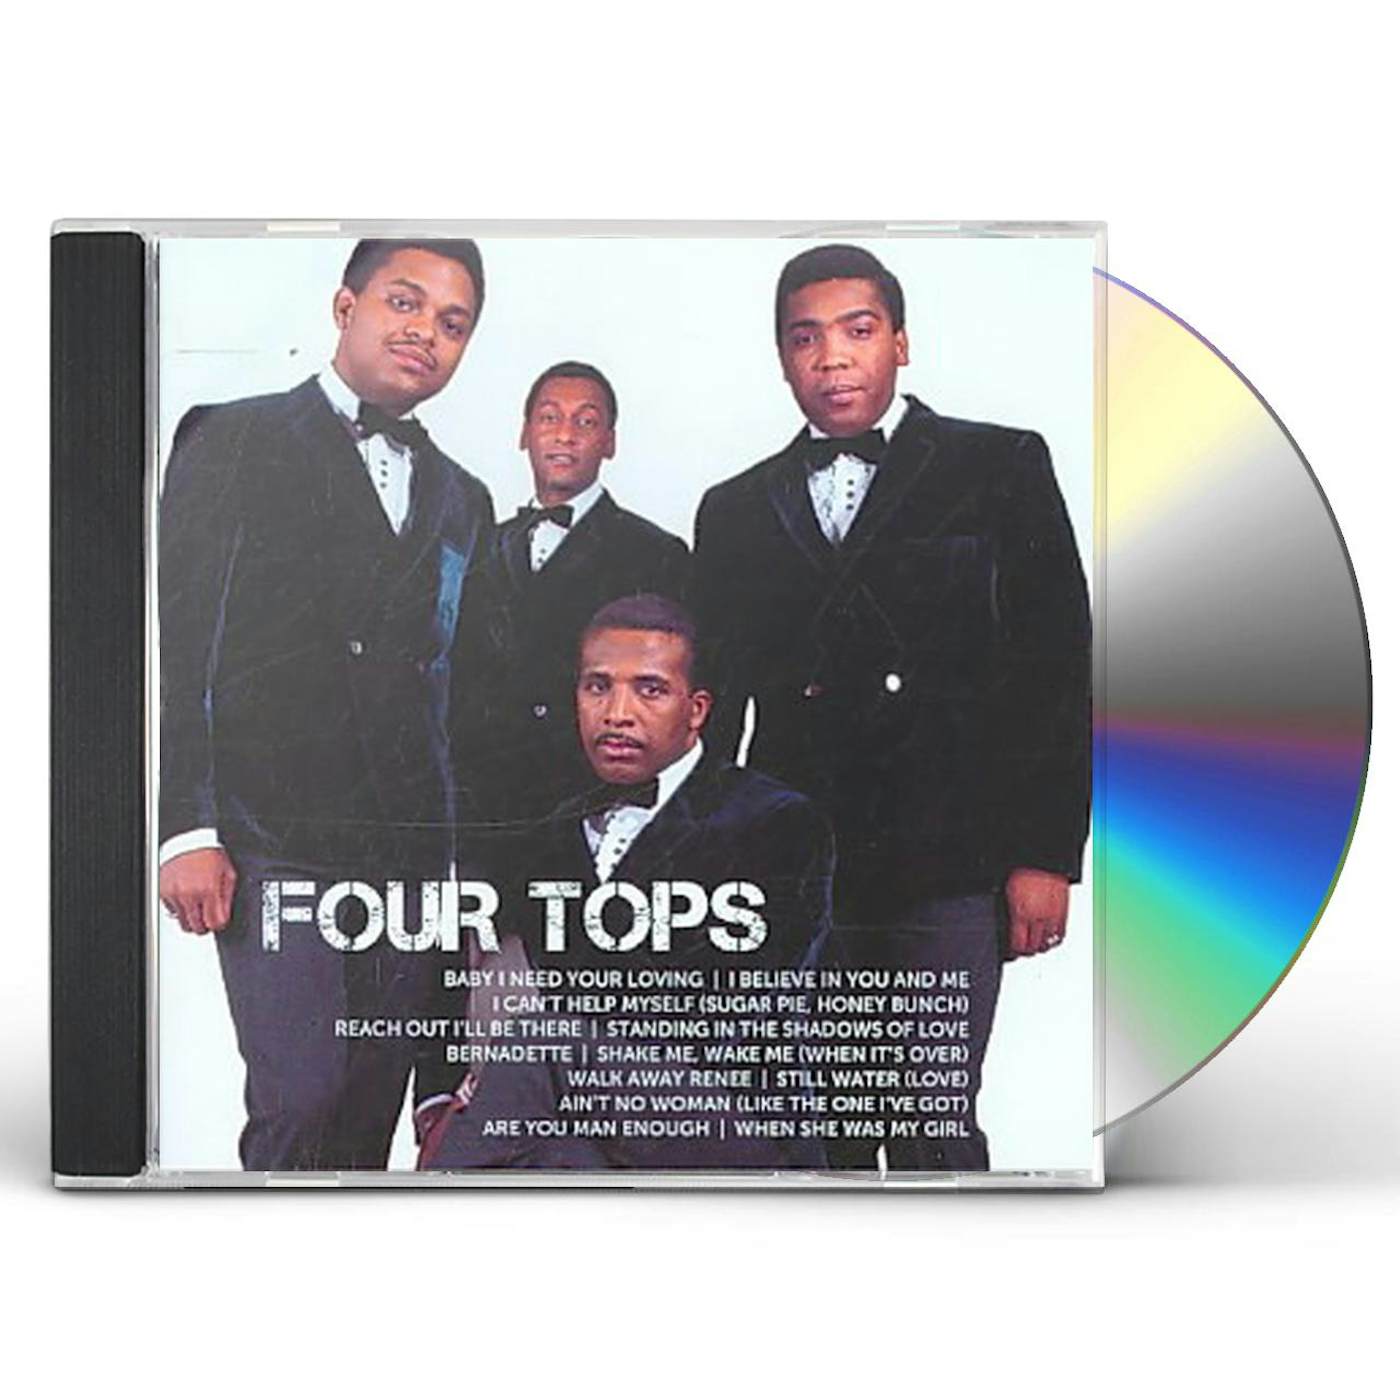 Four Tops ICON CD